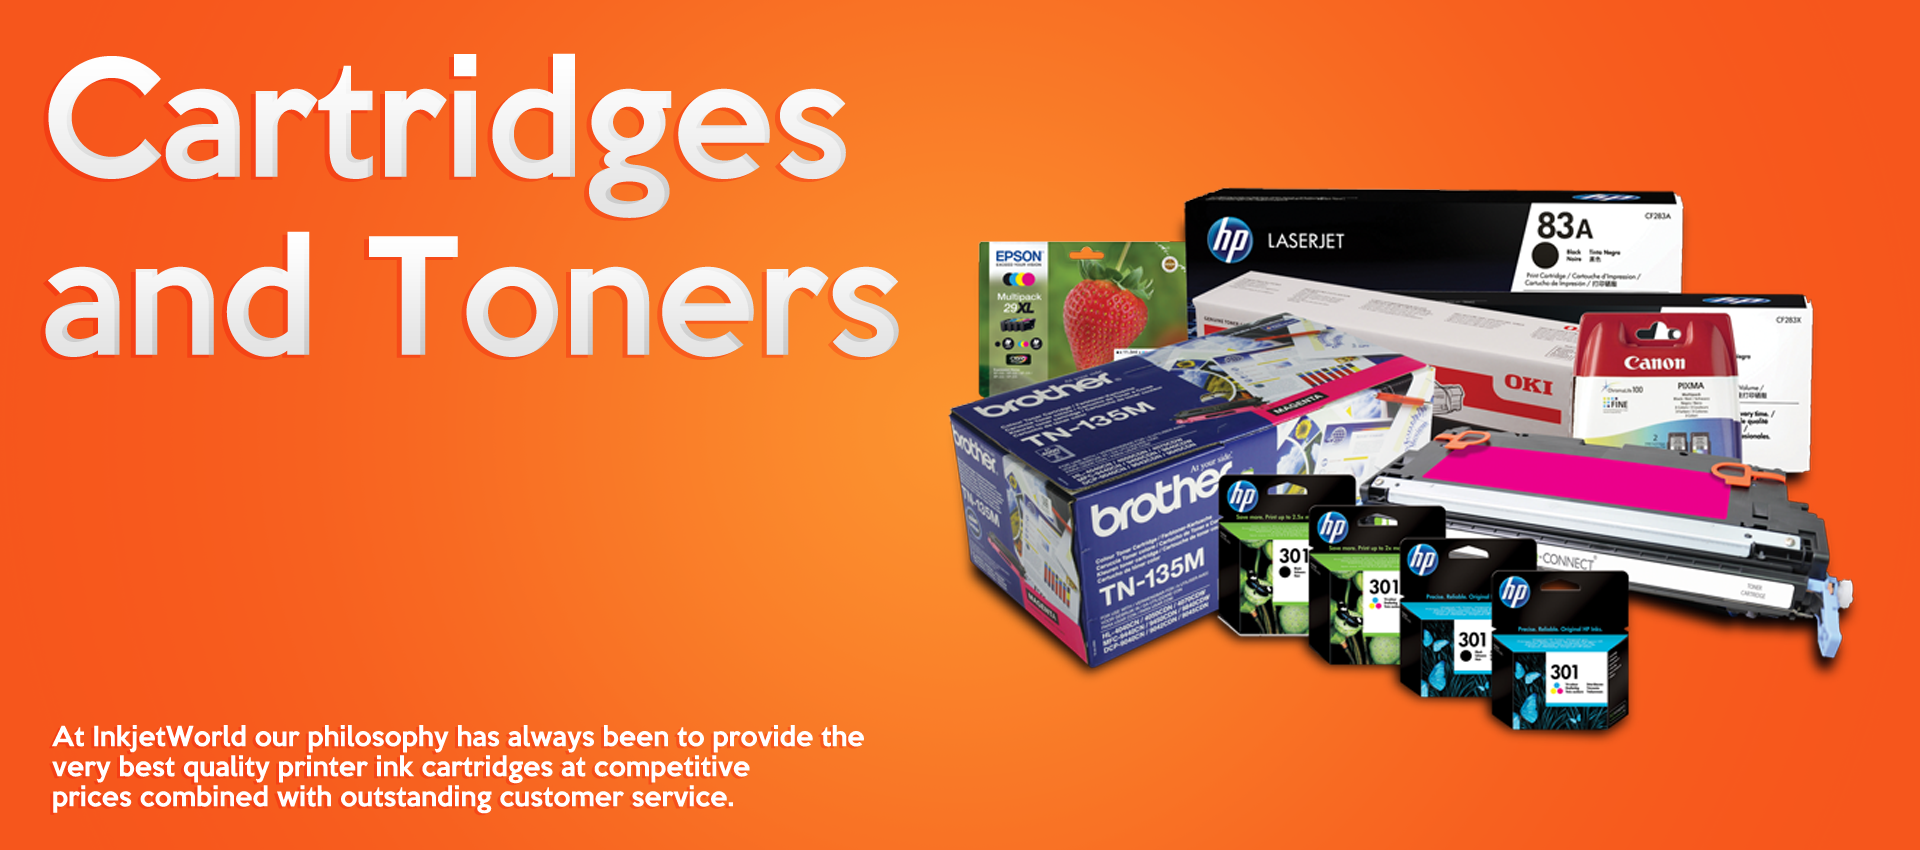 Cartridges and Toners Banner